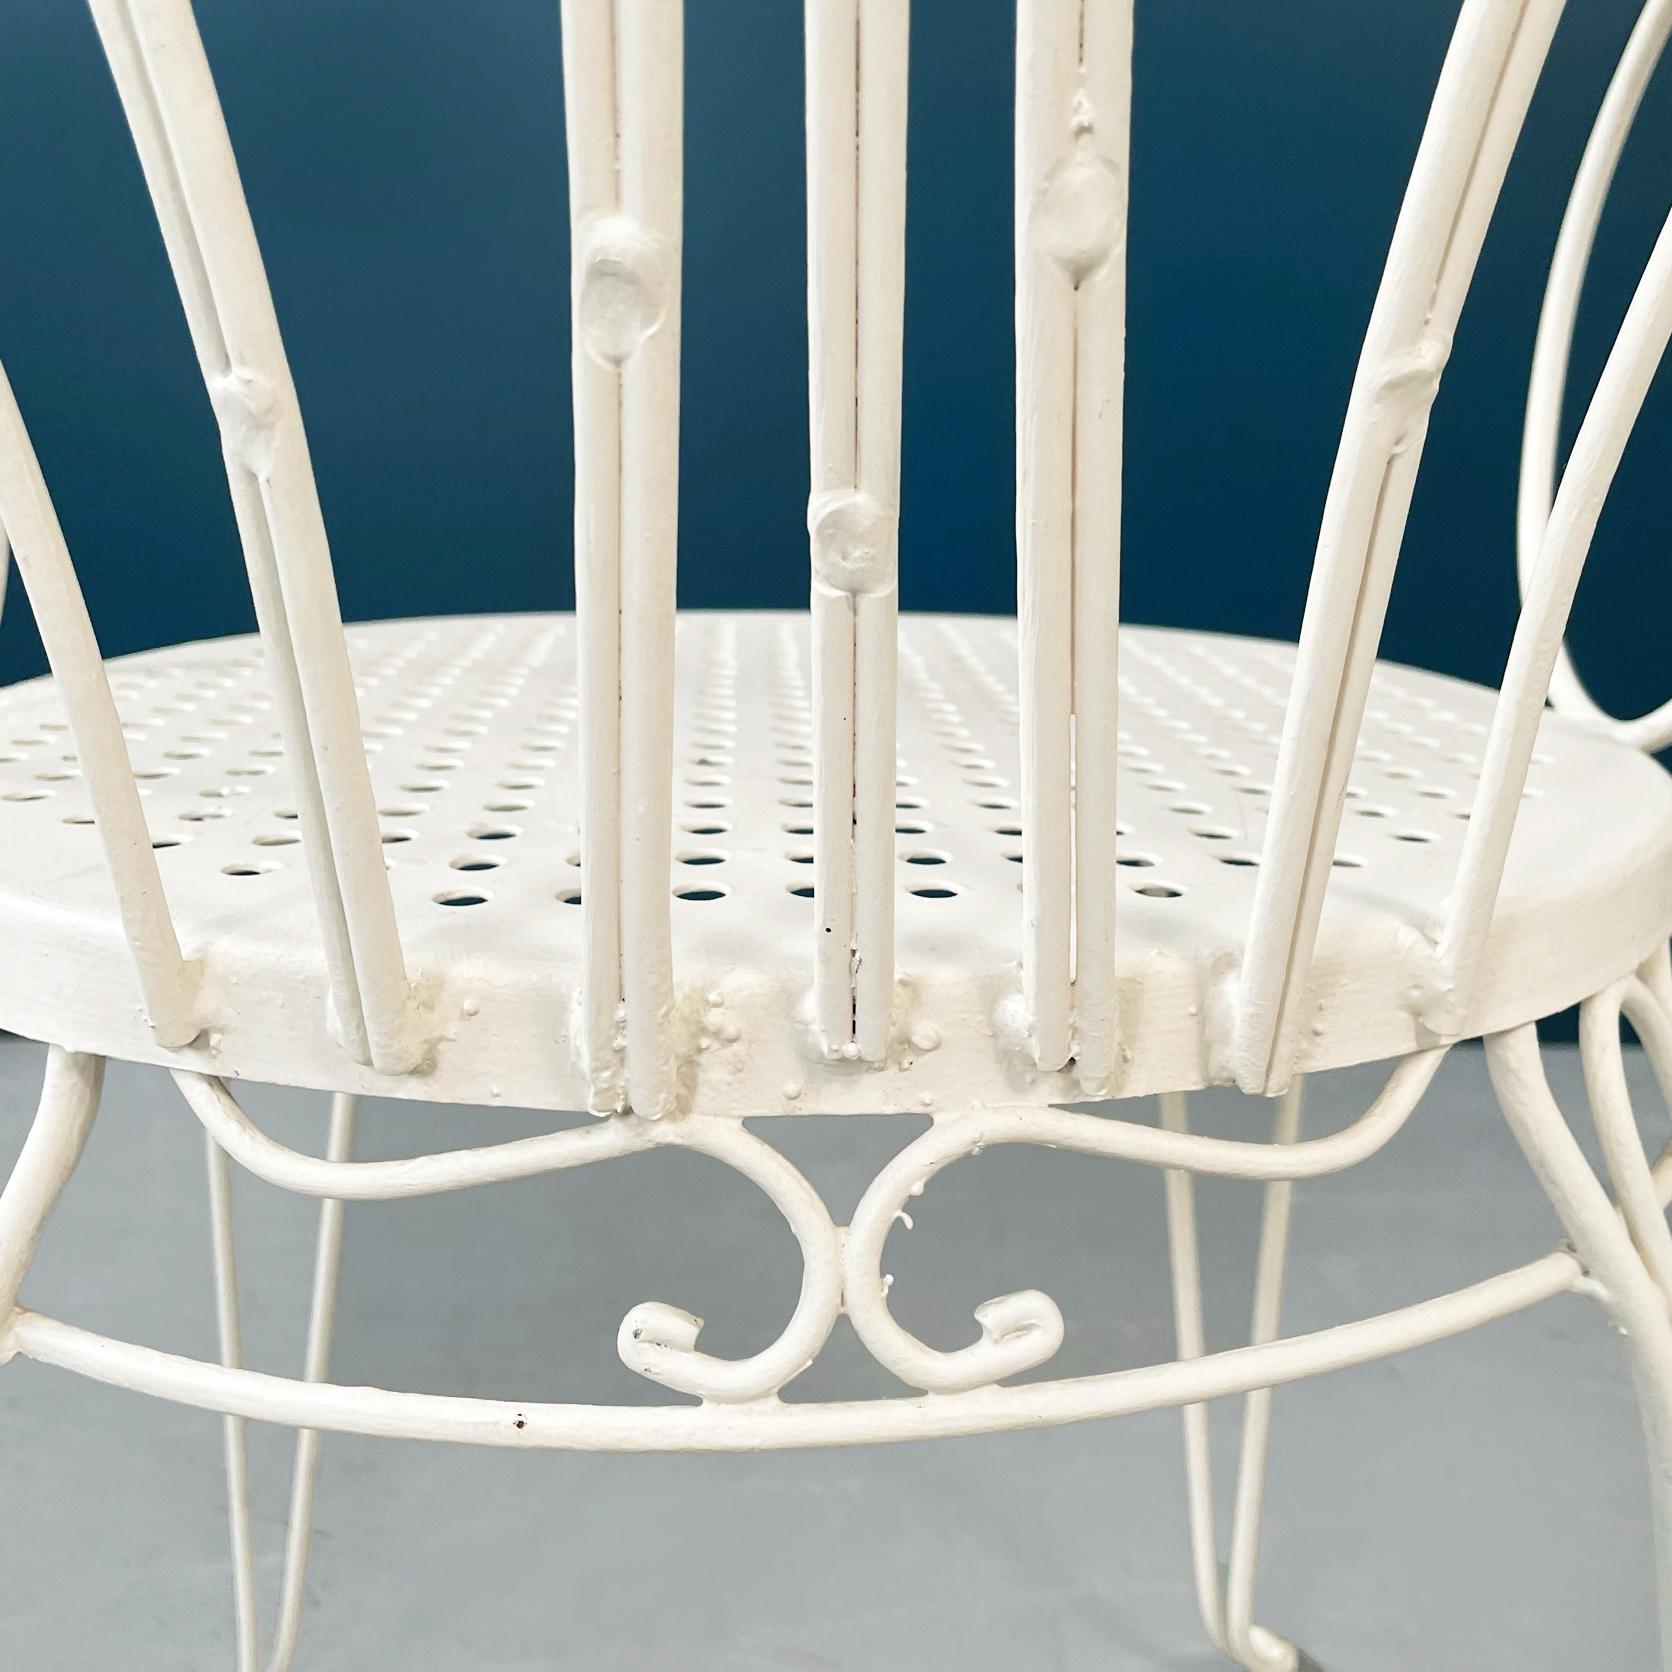 Italian Mid-Century Garden Chairs in White Wrought Iron with Curls, 1960s For Sale 7